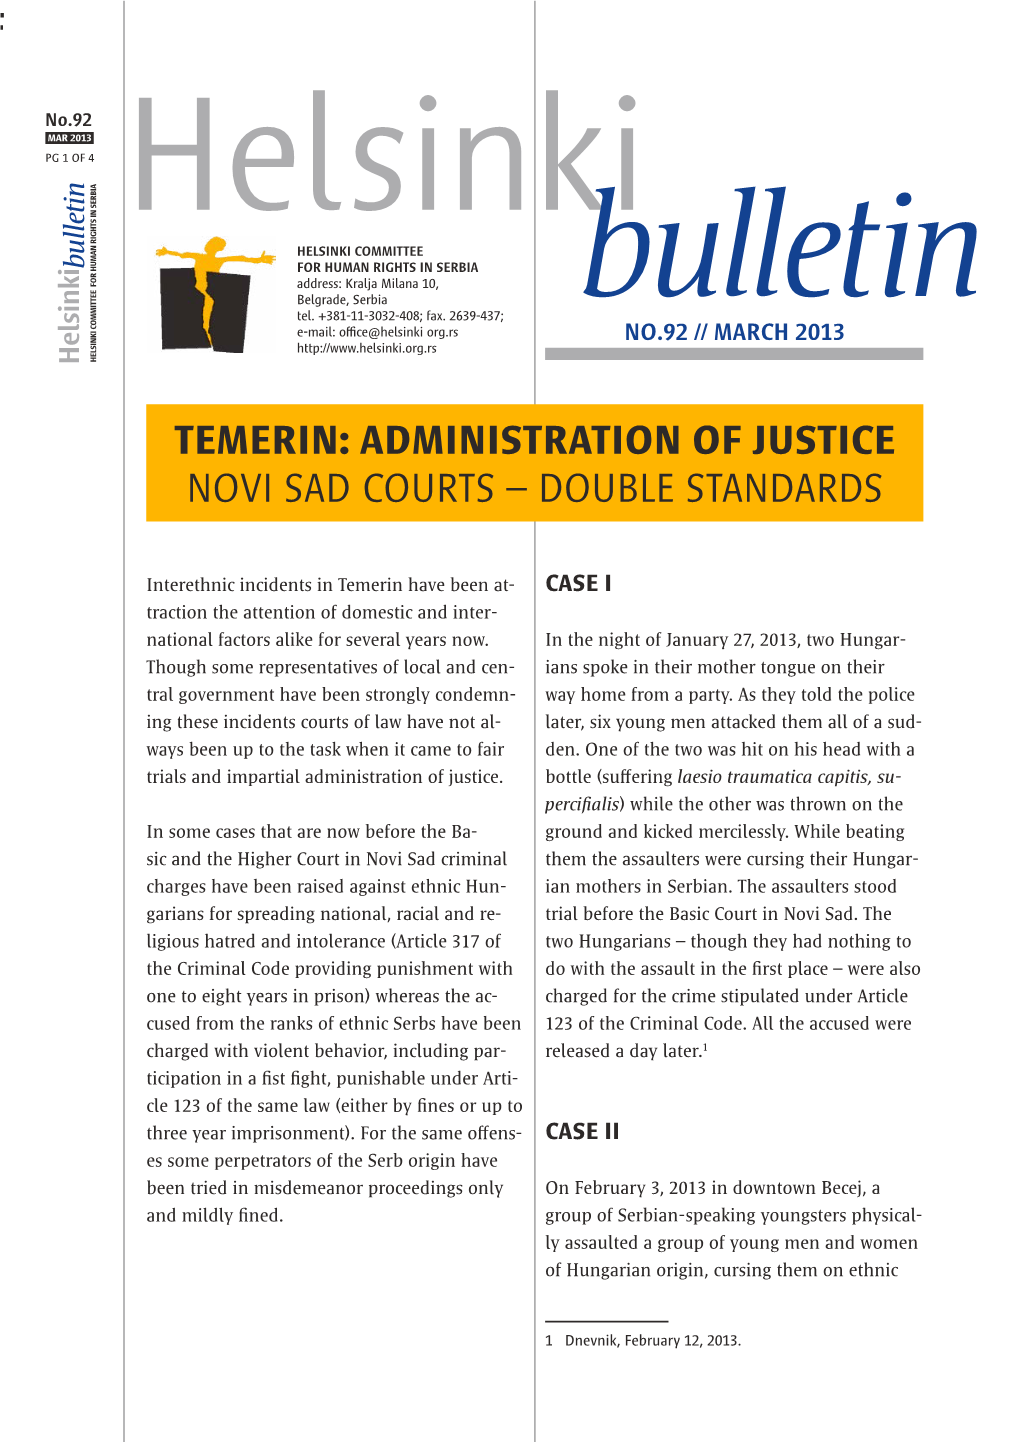 Temerin: Administration of Justice